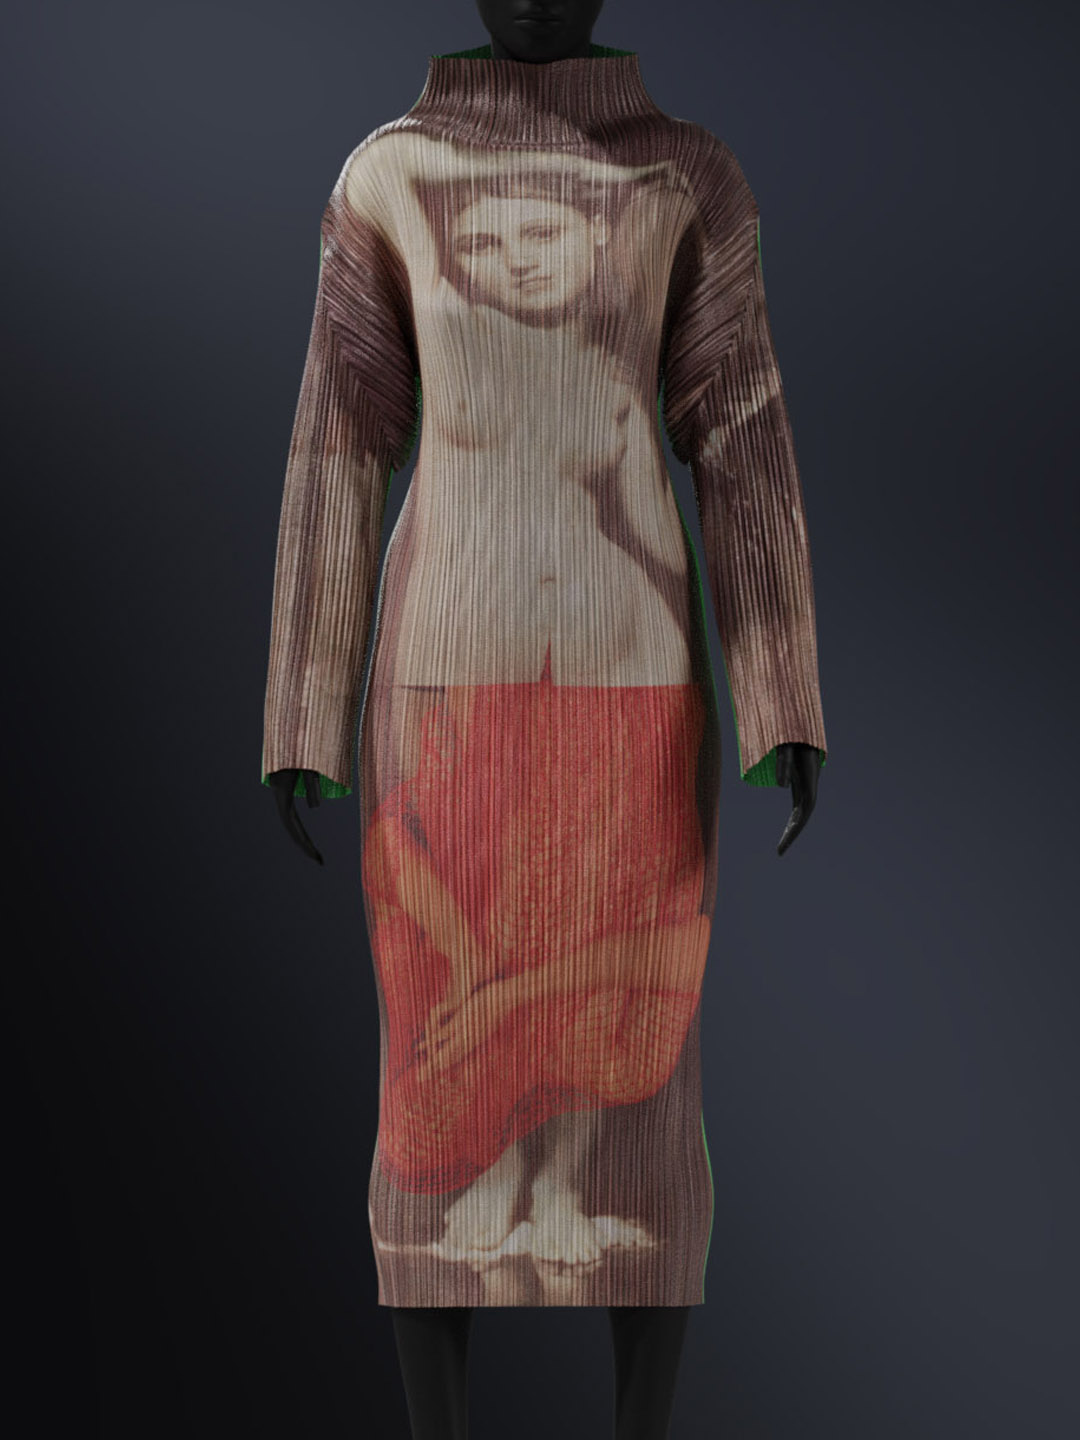 The Virtual Fashion Archive — A collection of archival fashion